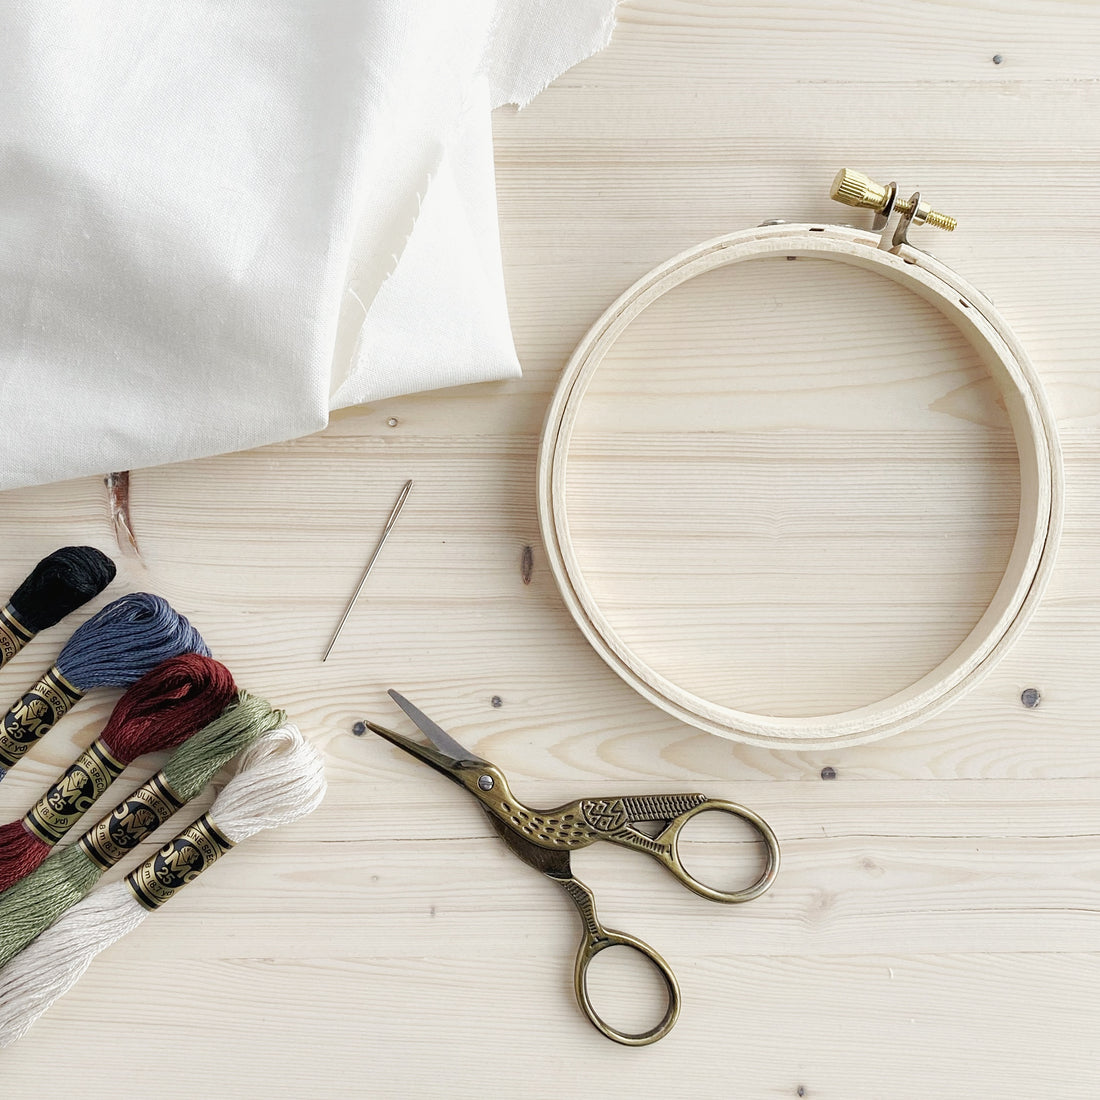 Embroidery essentials: a wooden embroidery hoop, an embroidery needle, DMC embroidery floss, quilting cotton fabric, and a pair of stork-shaped embroidery scissors.